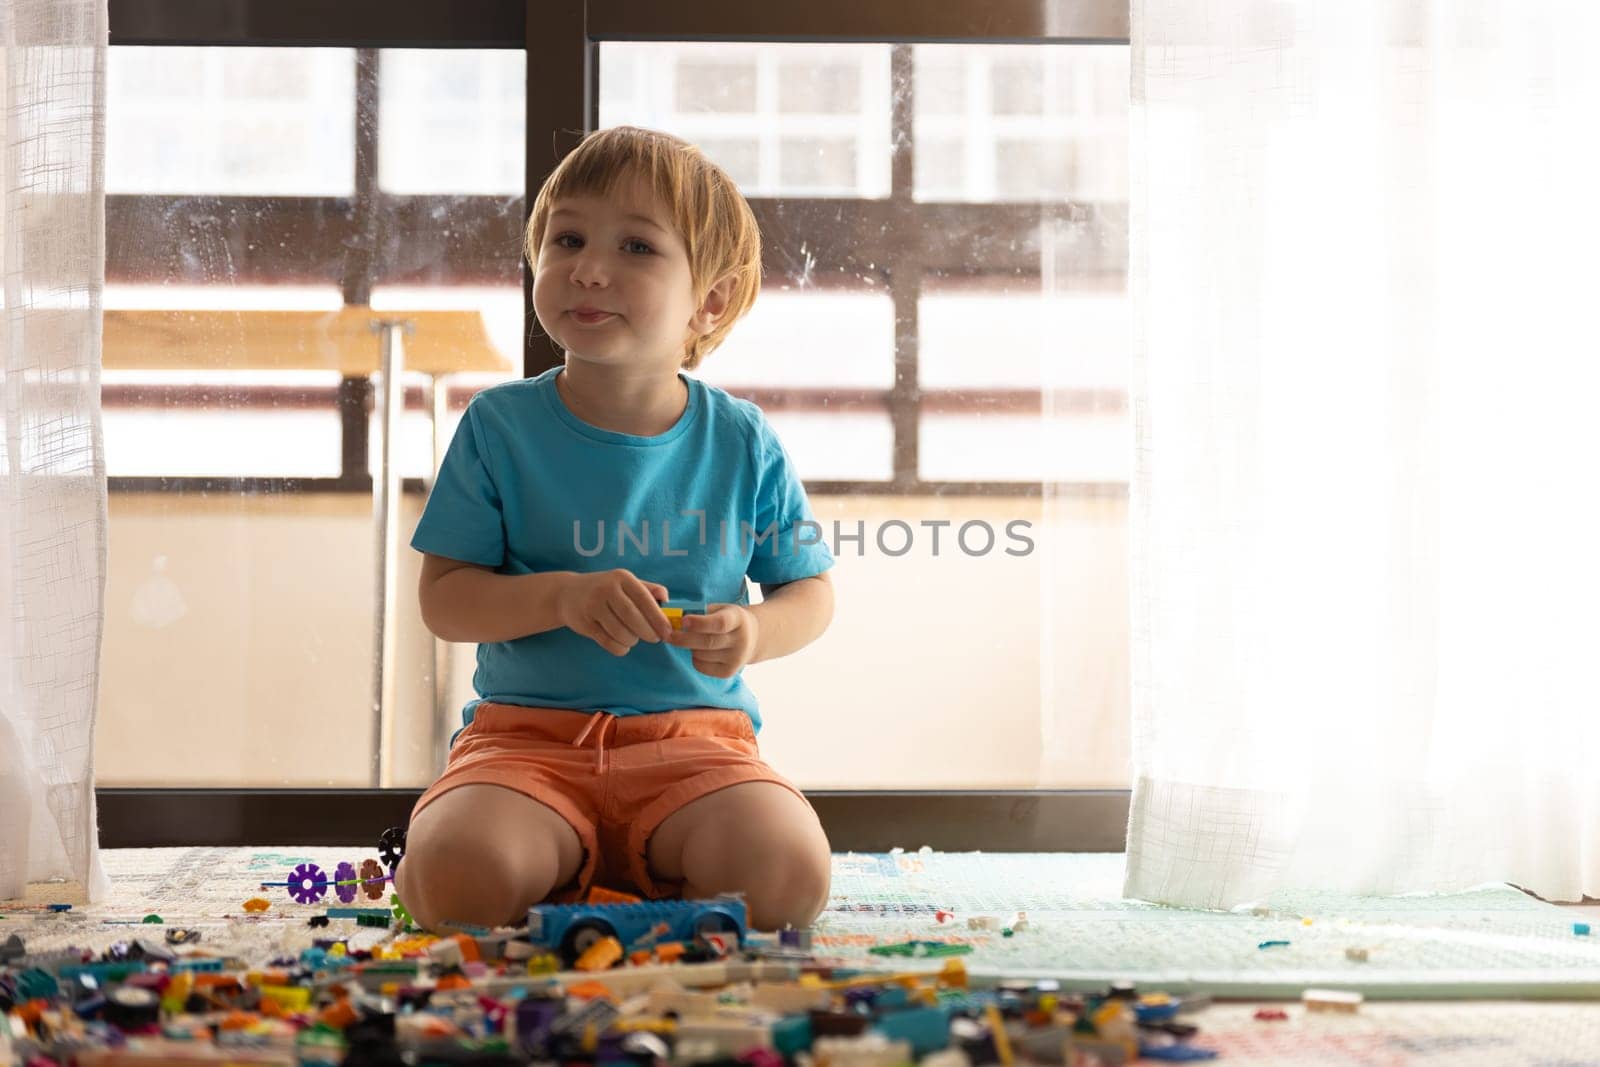 A little boy sitting on the floor in front of a window